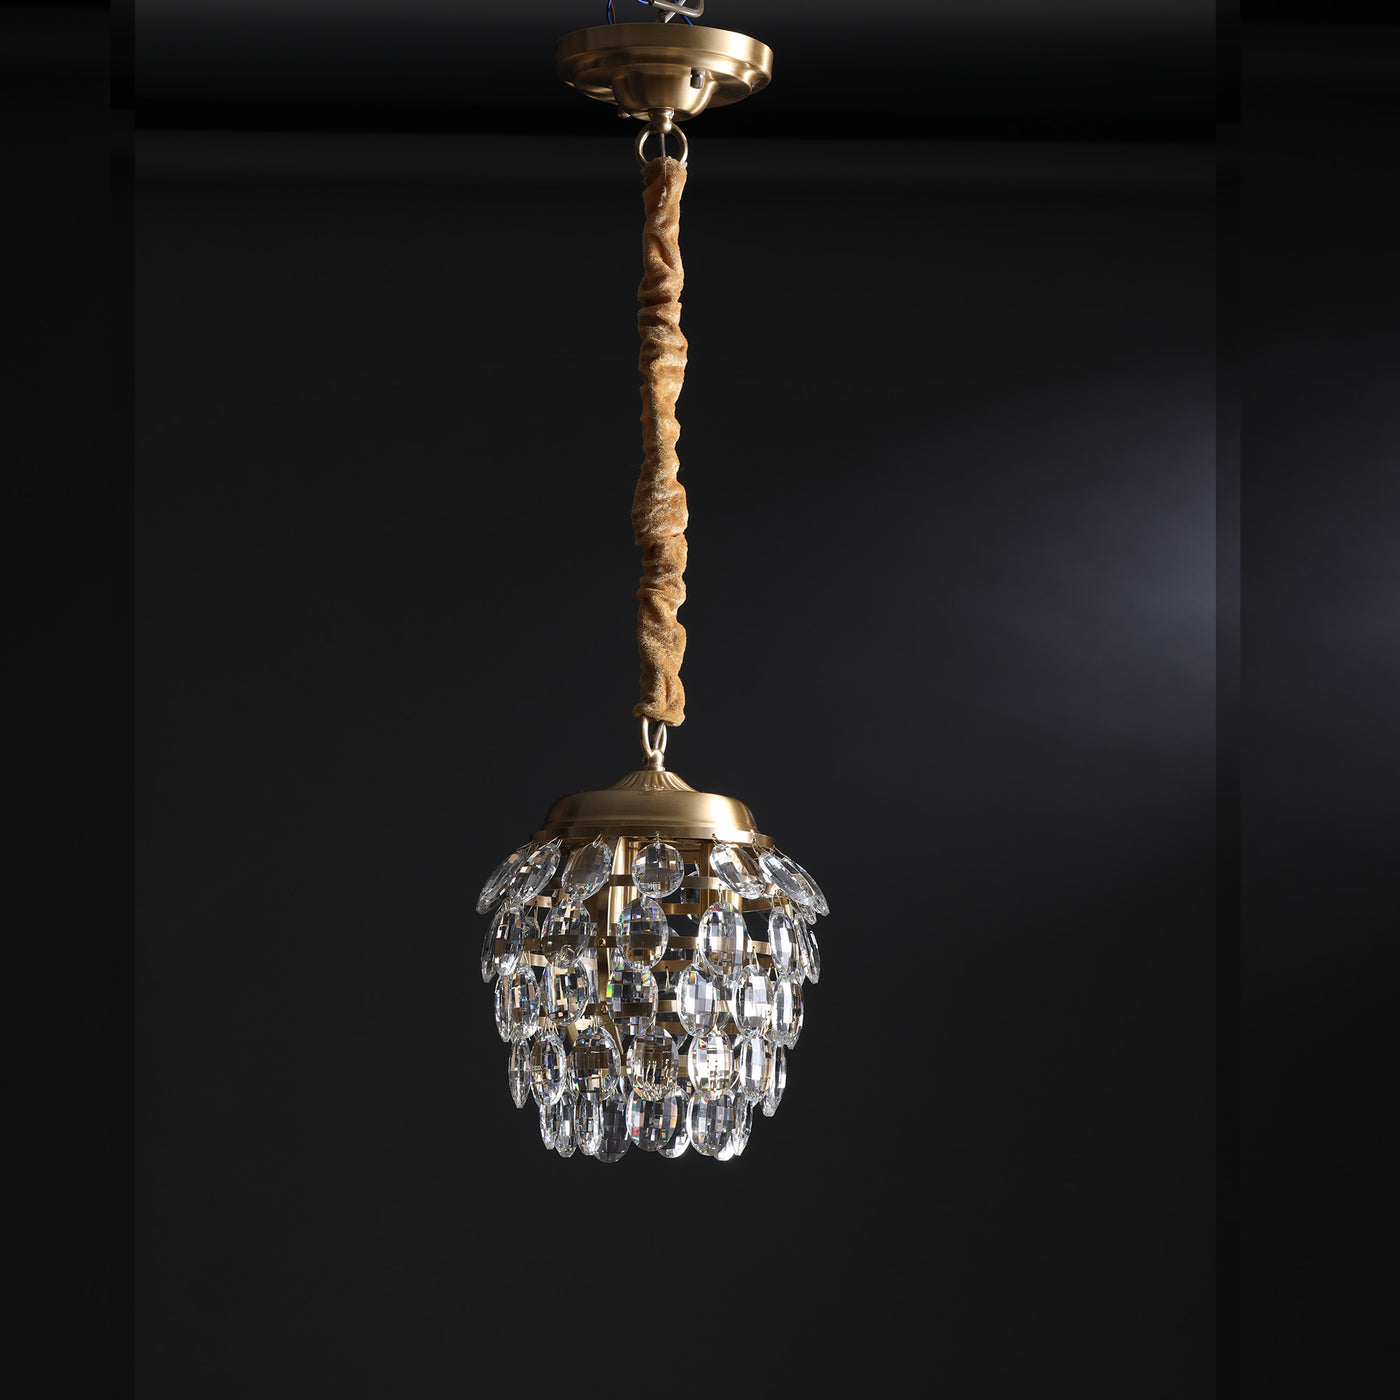 Pine cone shaped crystal chandelier